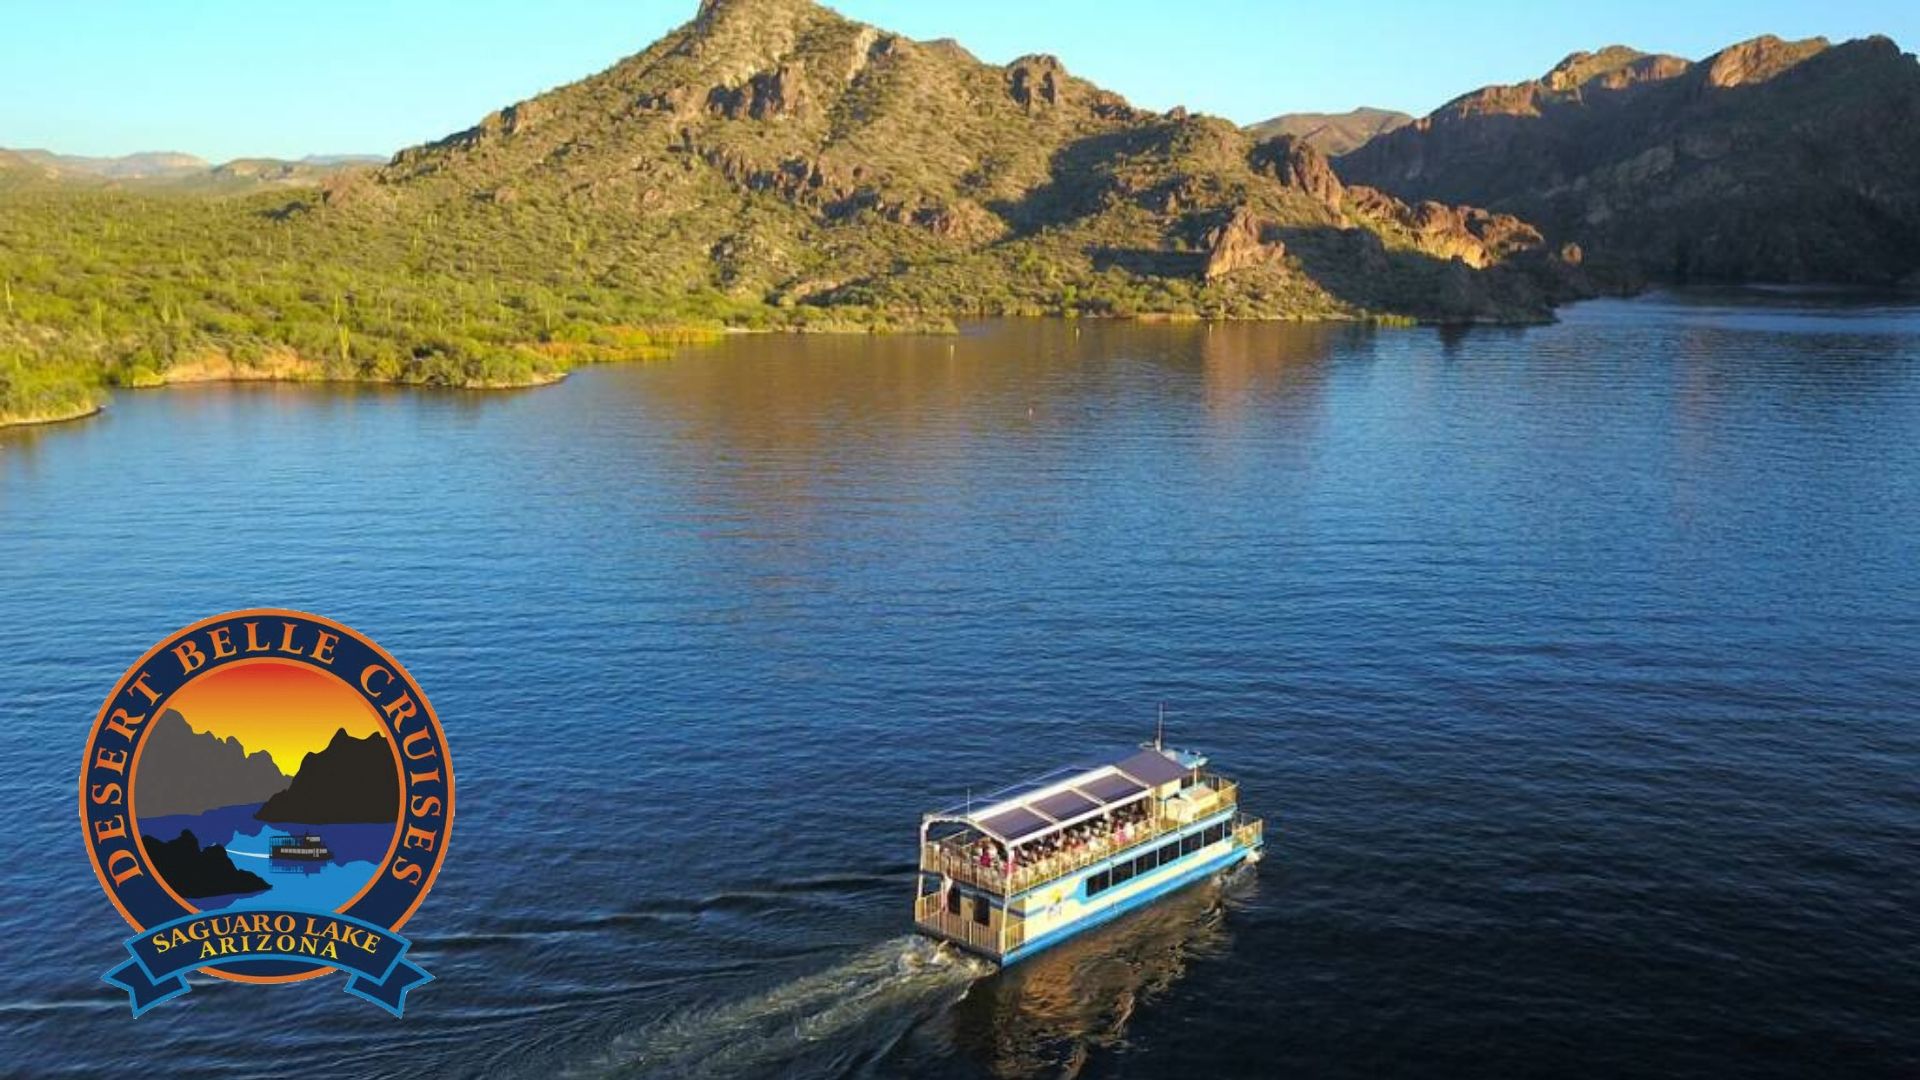 A popular thing to do for families, the Desert Belle Cruise travels down Saguaro Lake.